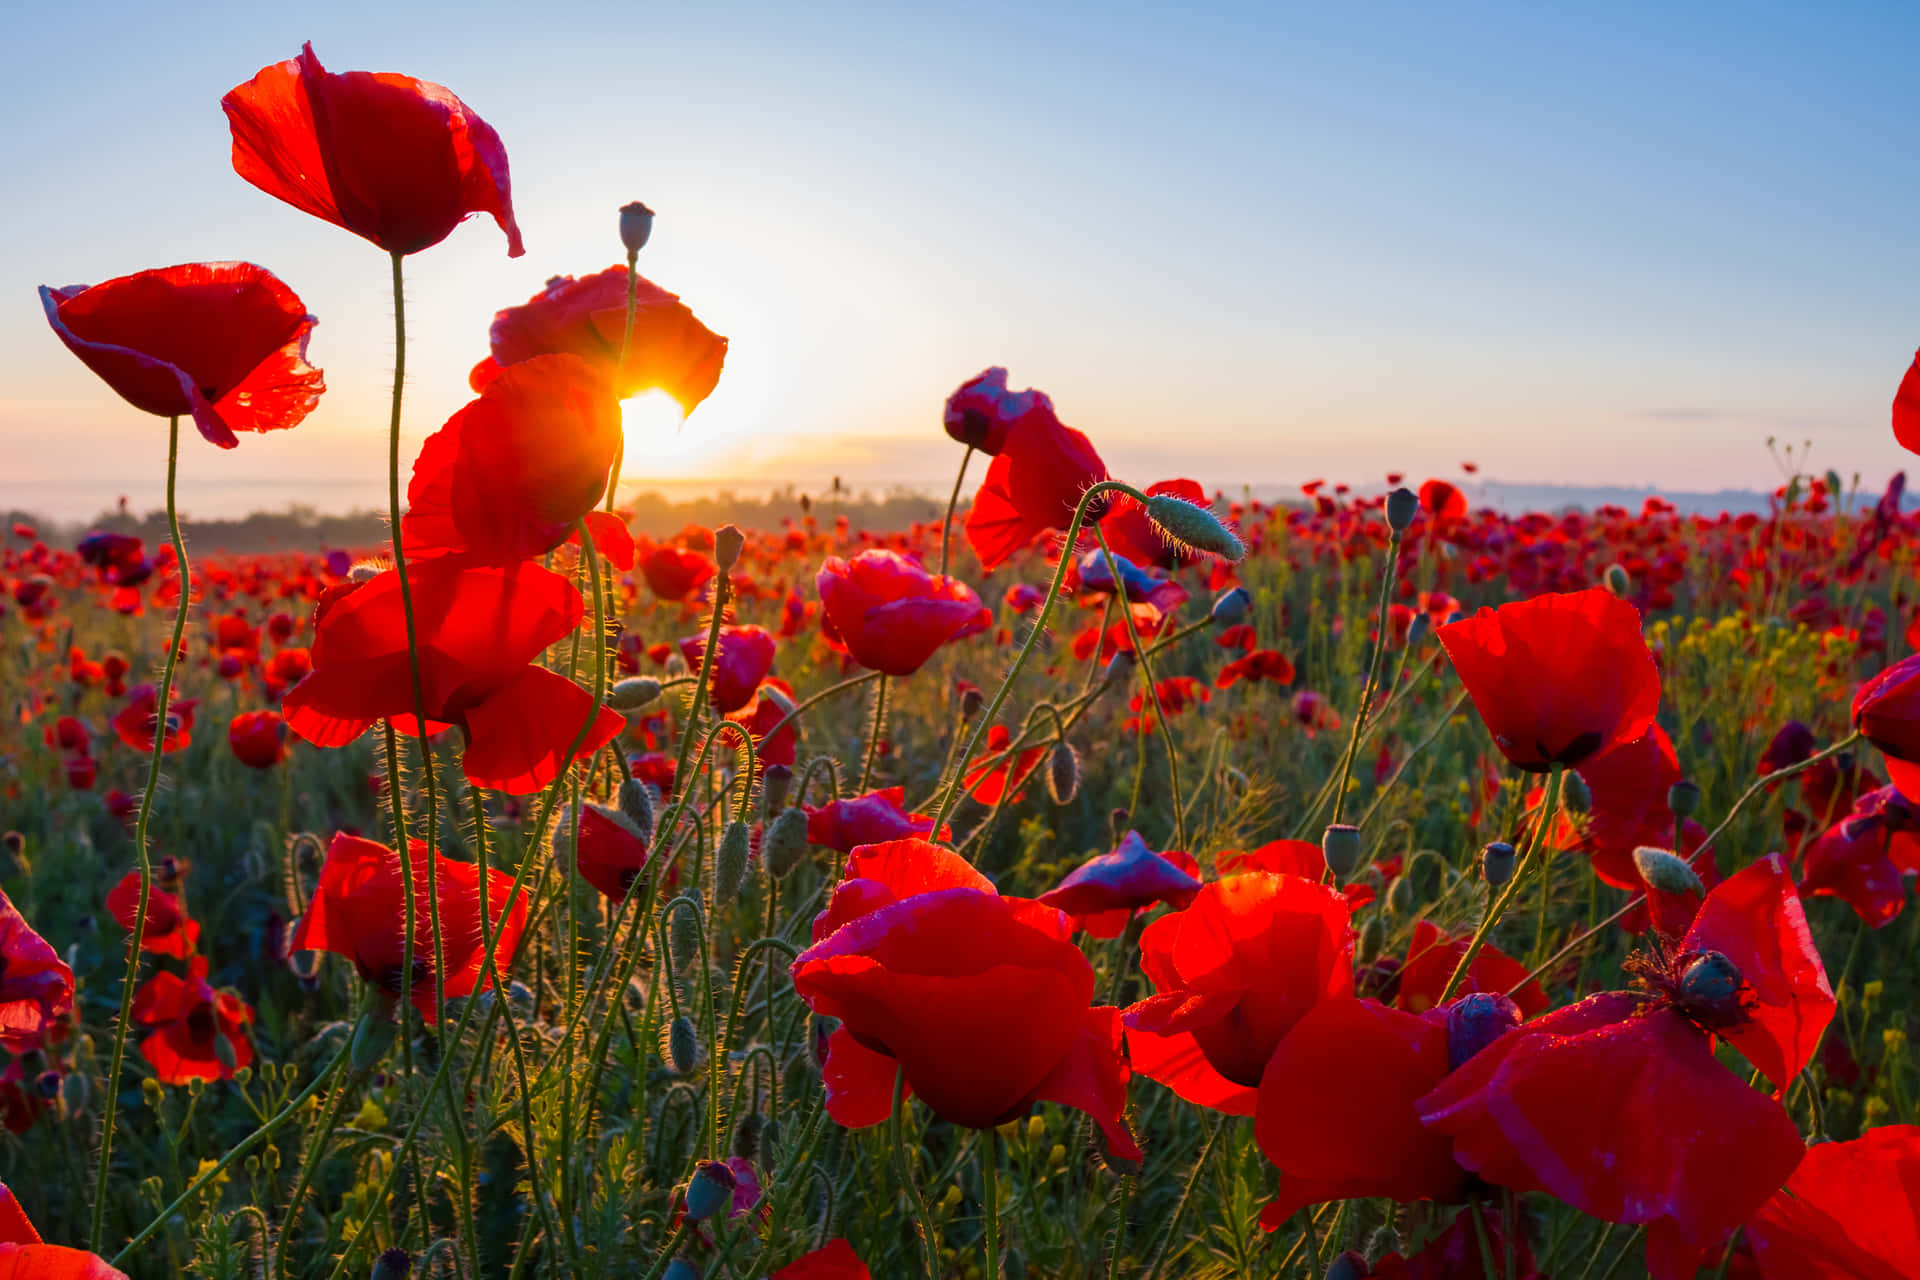 Captivating Red Poppy Field at Sunset Wallpaper